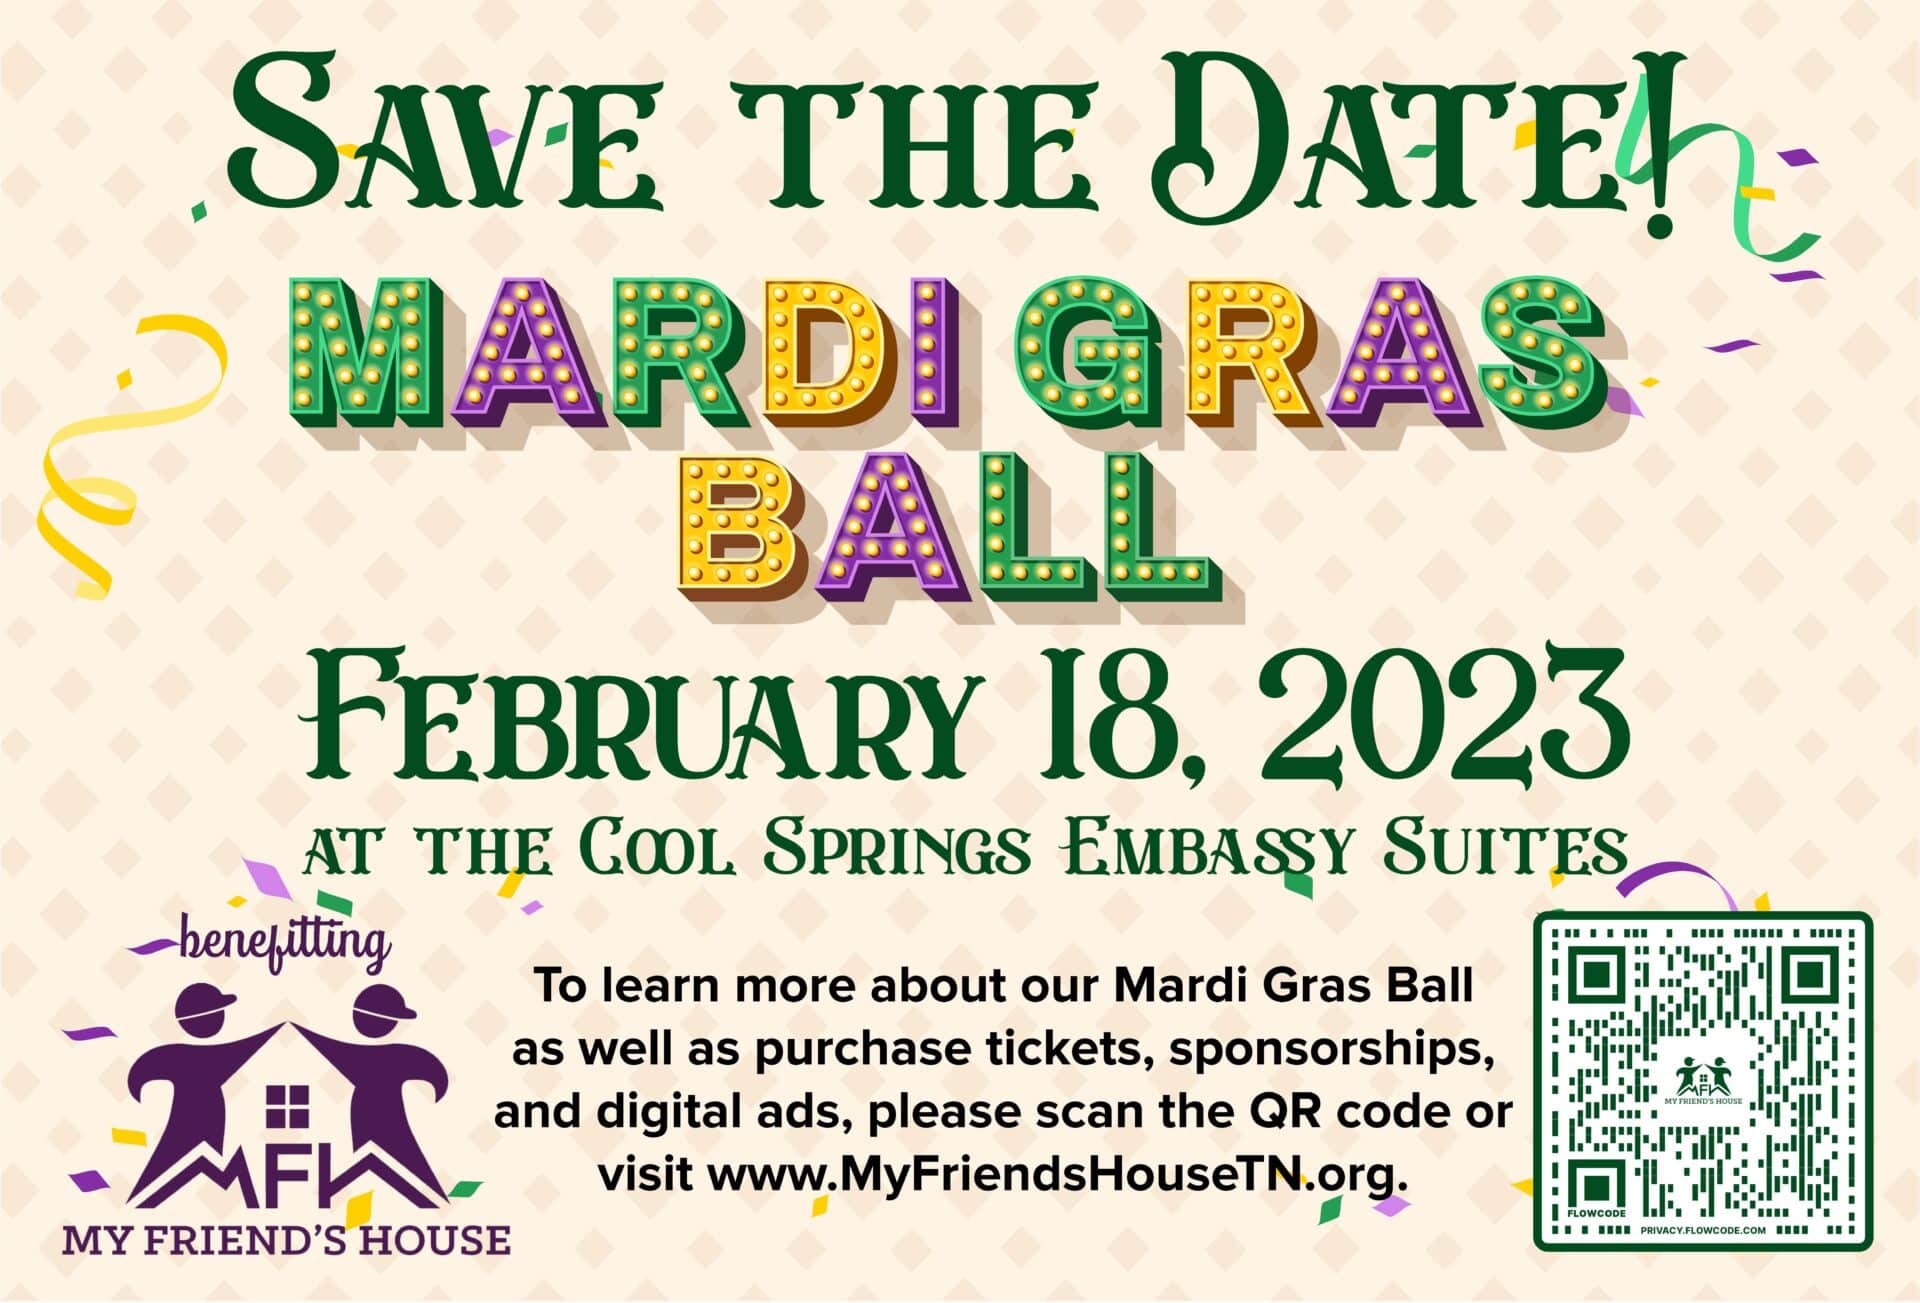 Mardi Gras Ball in Franklin, TN, My Friends House Save the Date.